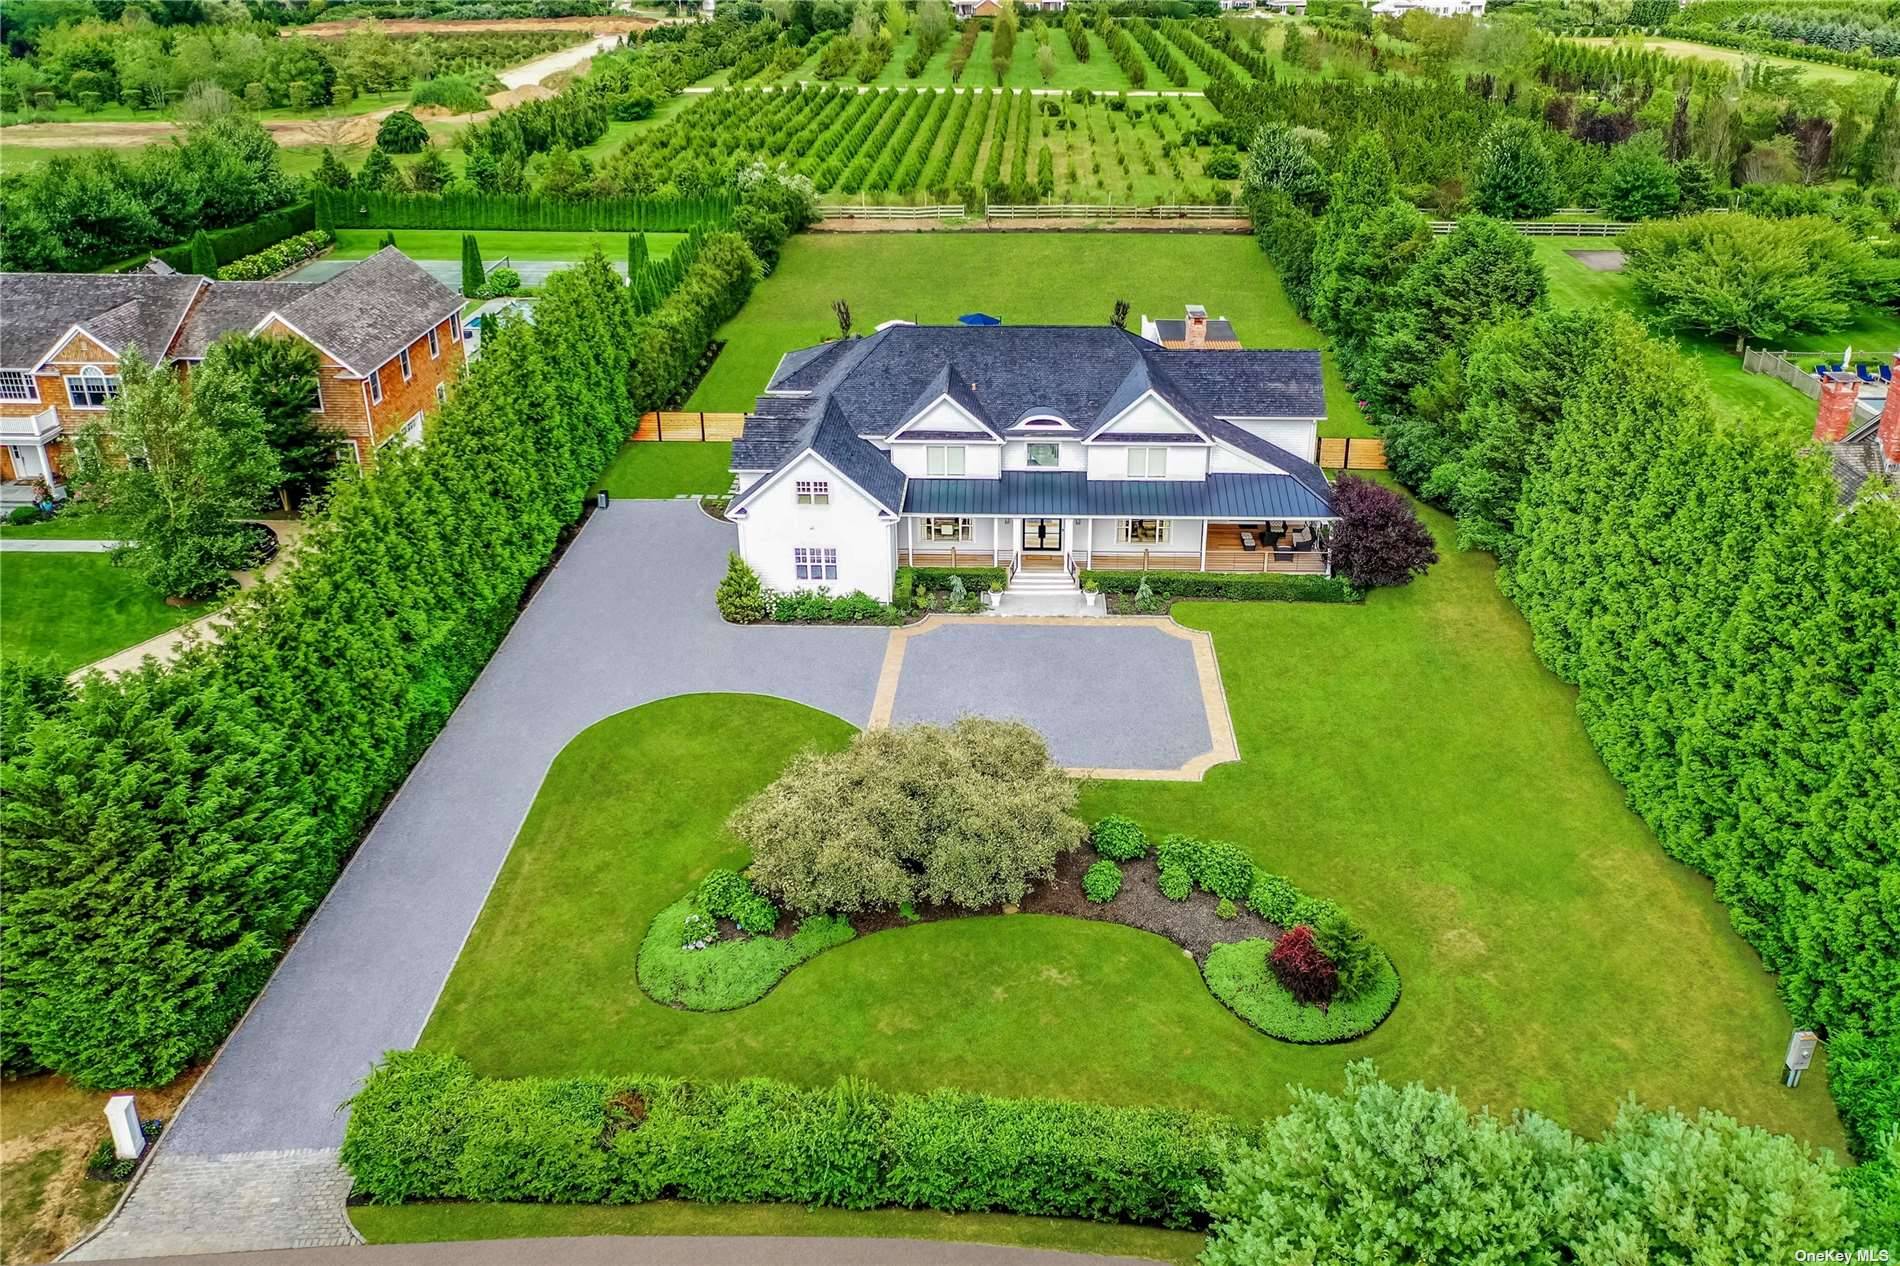 Water Mill offers estate living that blends the luxurious lifestyle of the Hamptons within a unique hamlet filled with historic charm and a quiet ambiance.